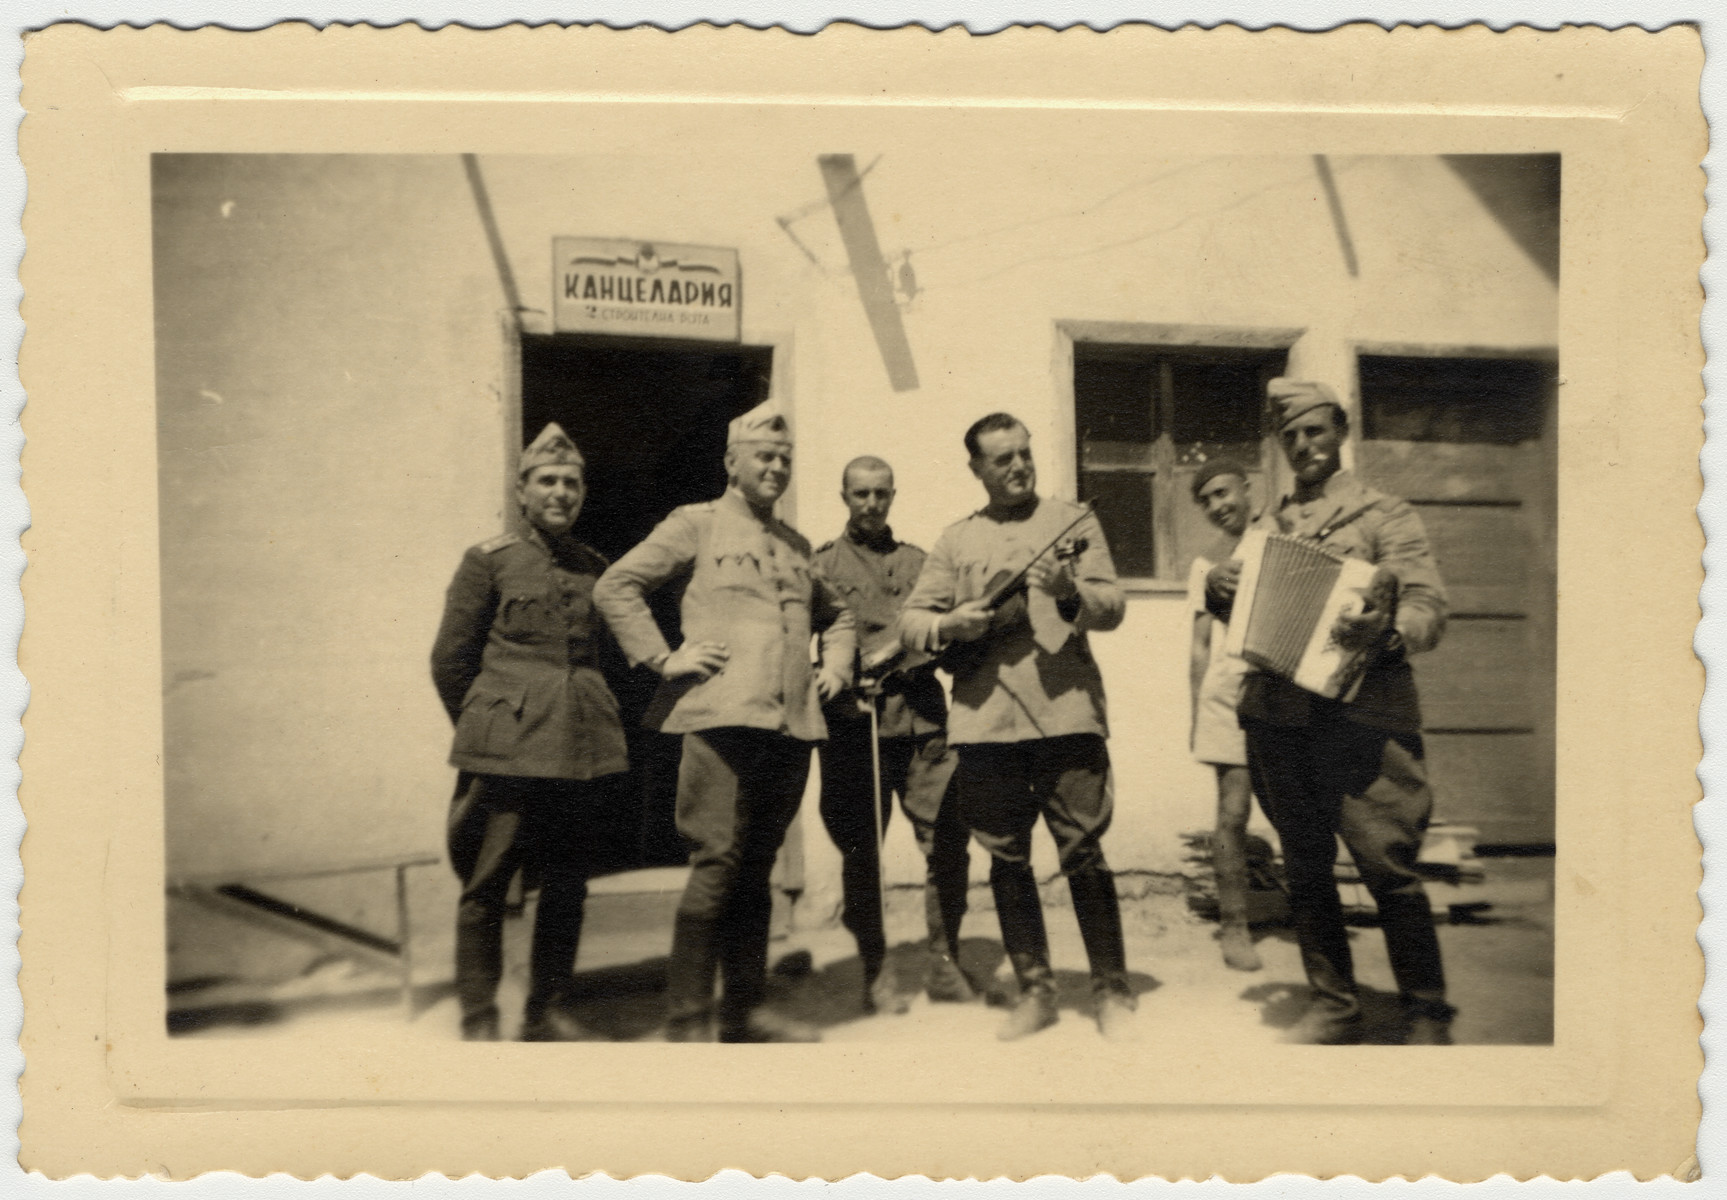 Bulgarian officers play musical instruments where they are stationed at a labor brigade in front of a building with a sign that reads "Chancellery".

Pictured in the center with a violin is Nissim Farhi.  Though Jewish, he was allowed to wear his uniform and socialize with other officers.